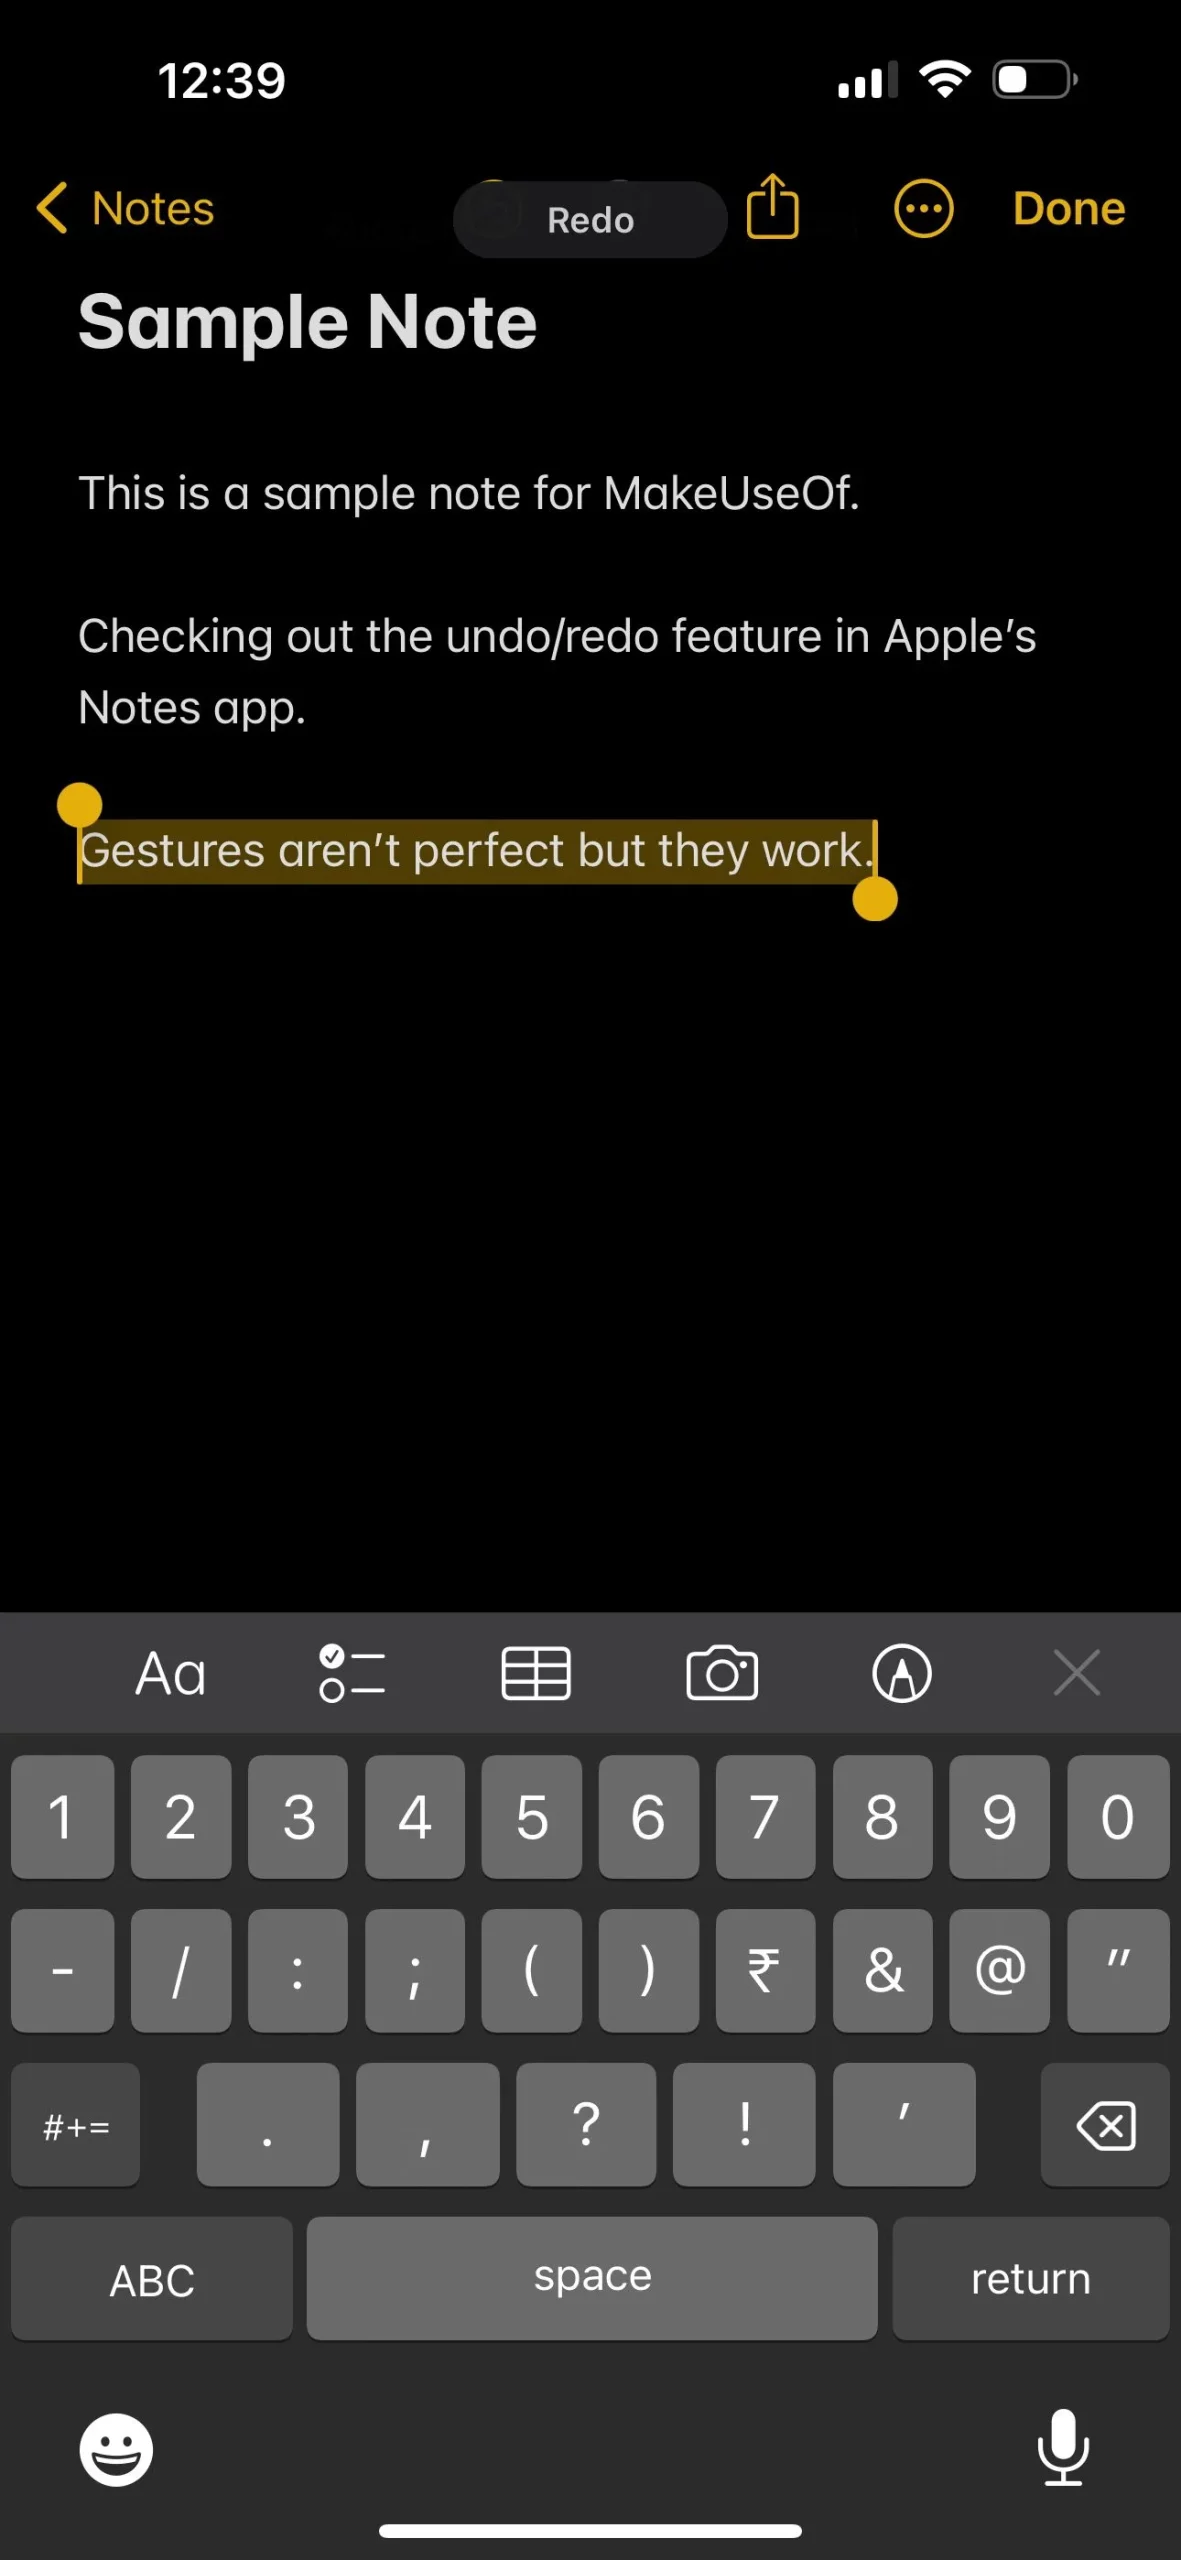 Oops, Did You Delete That? Simple Ways to Undo Mistakes in Your iPhone Notes App